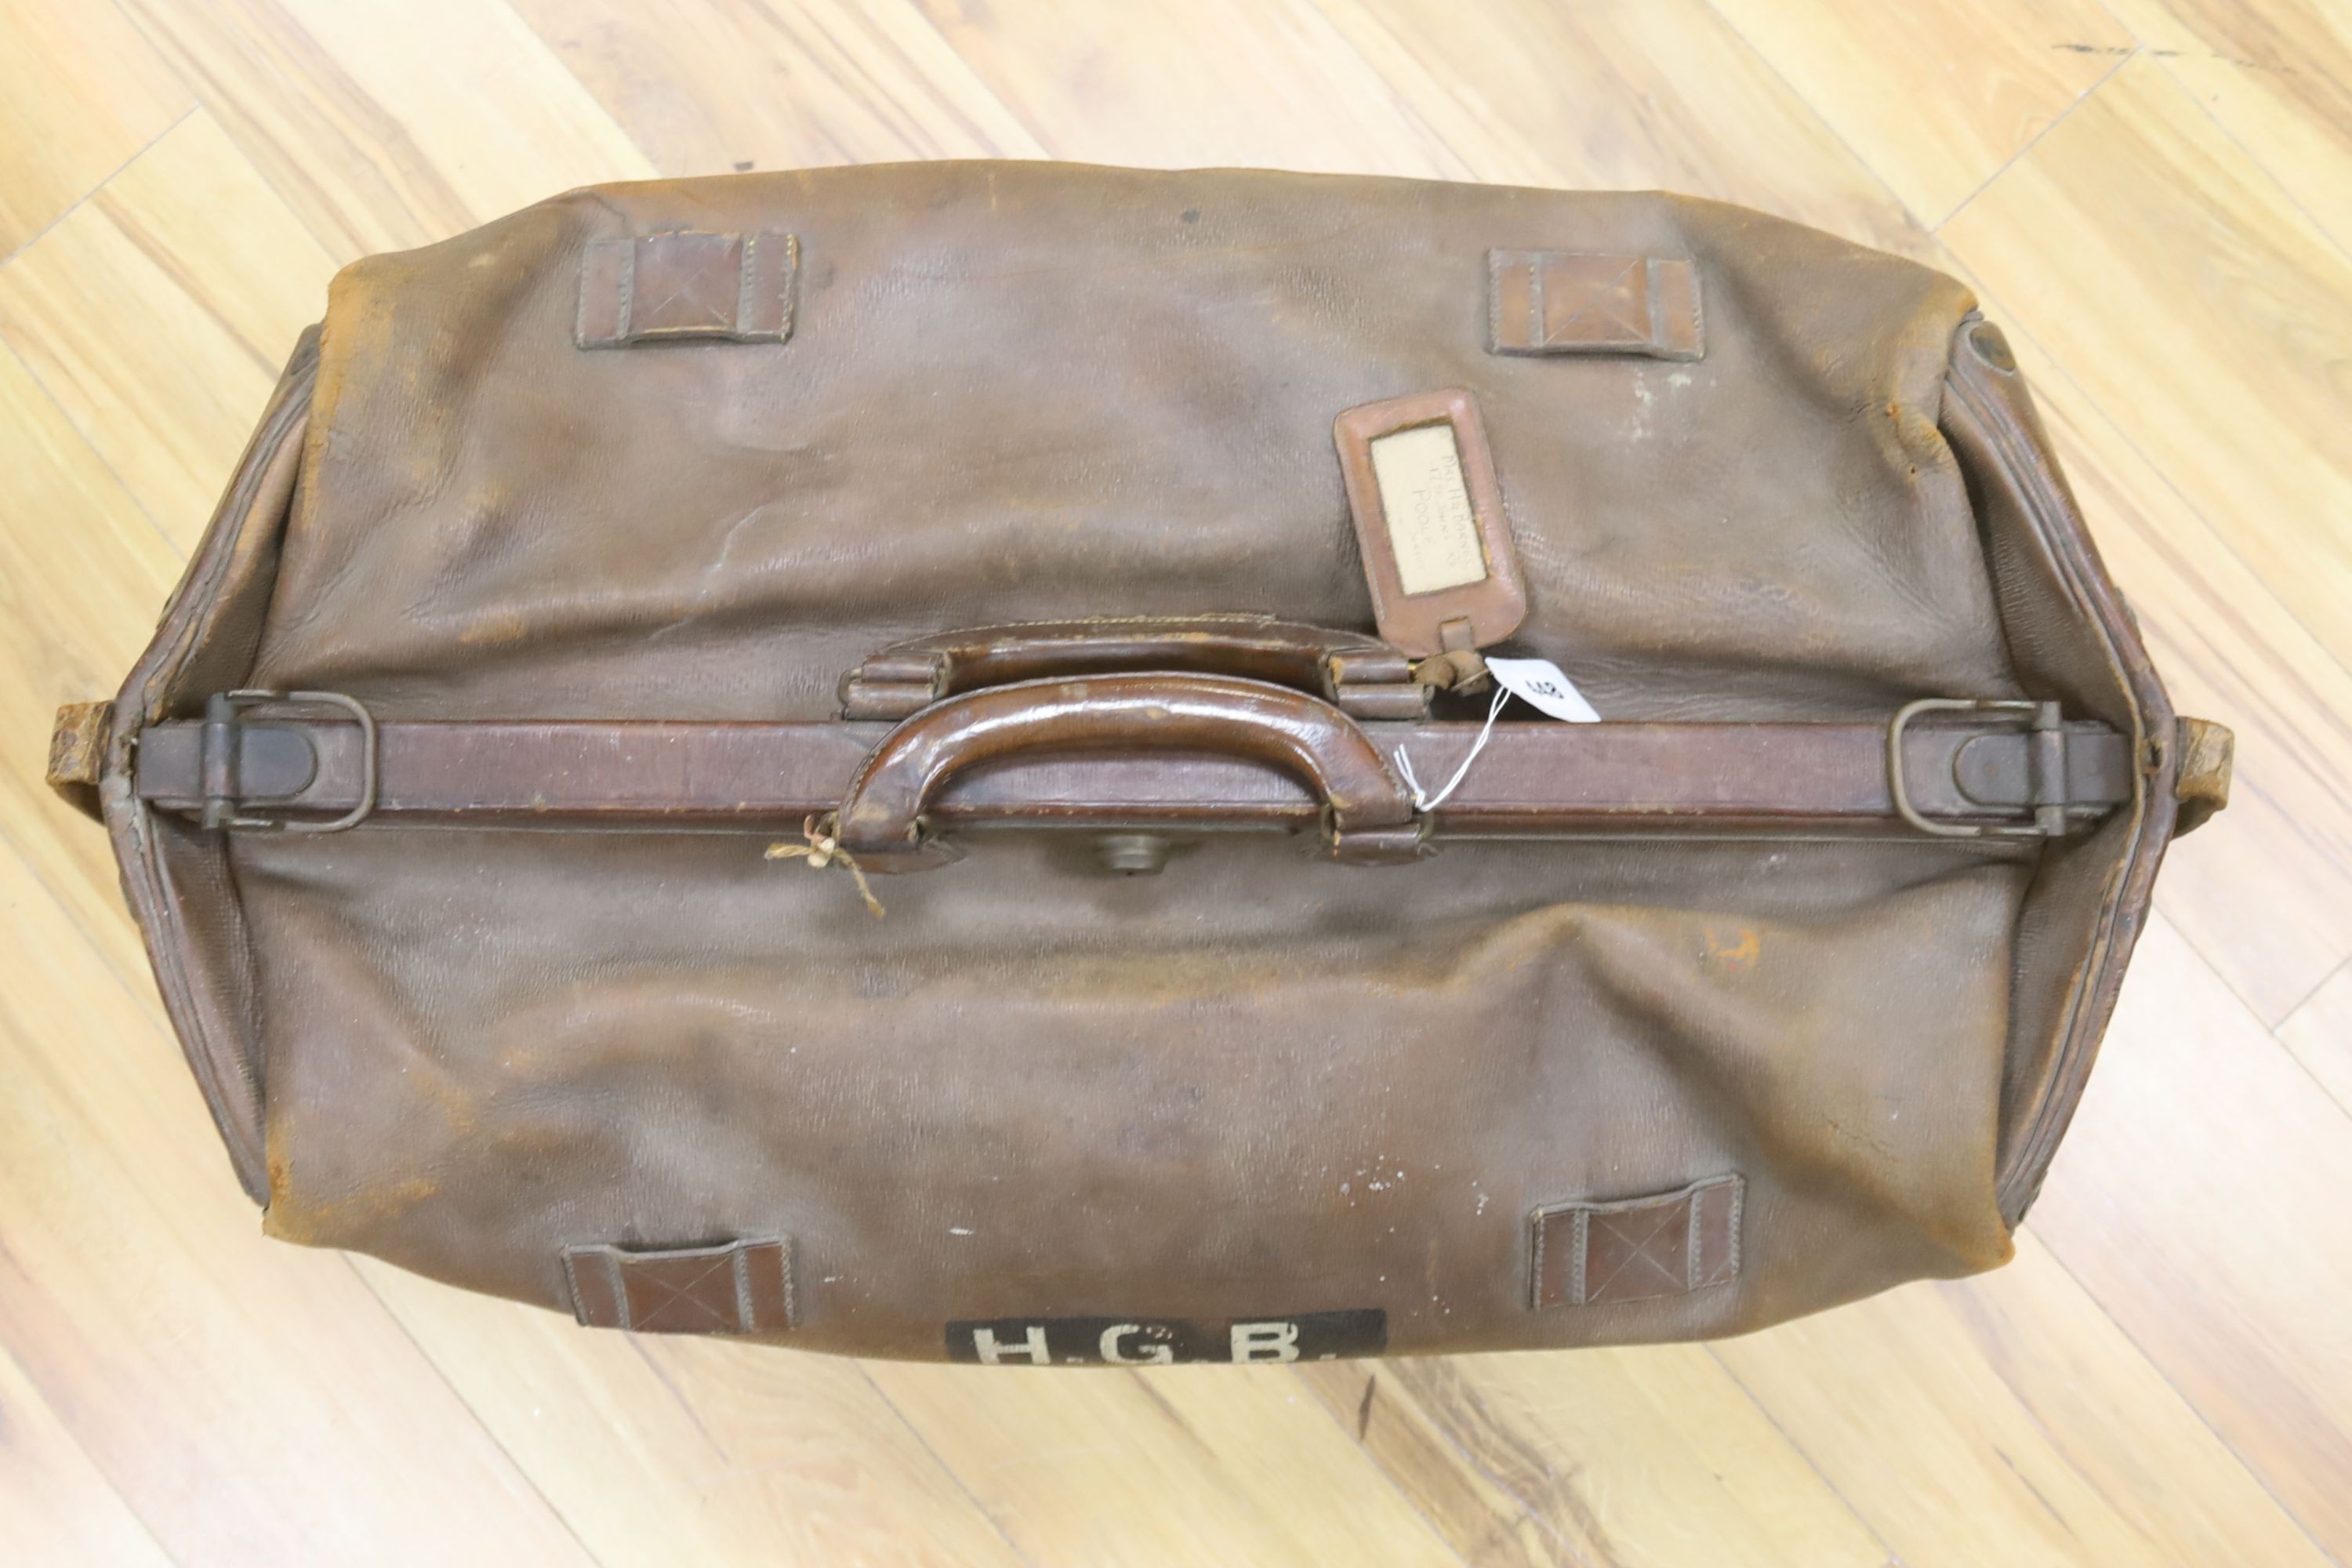 A large Gladstone bag, military canvas contents